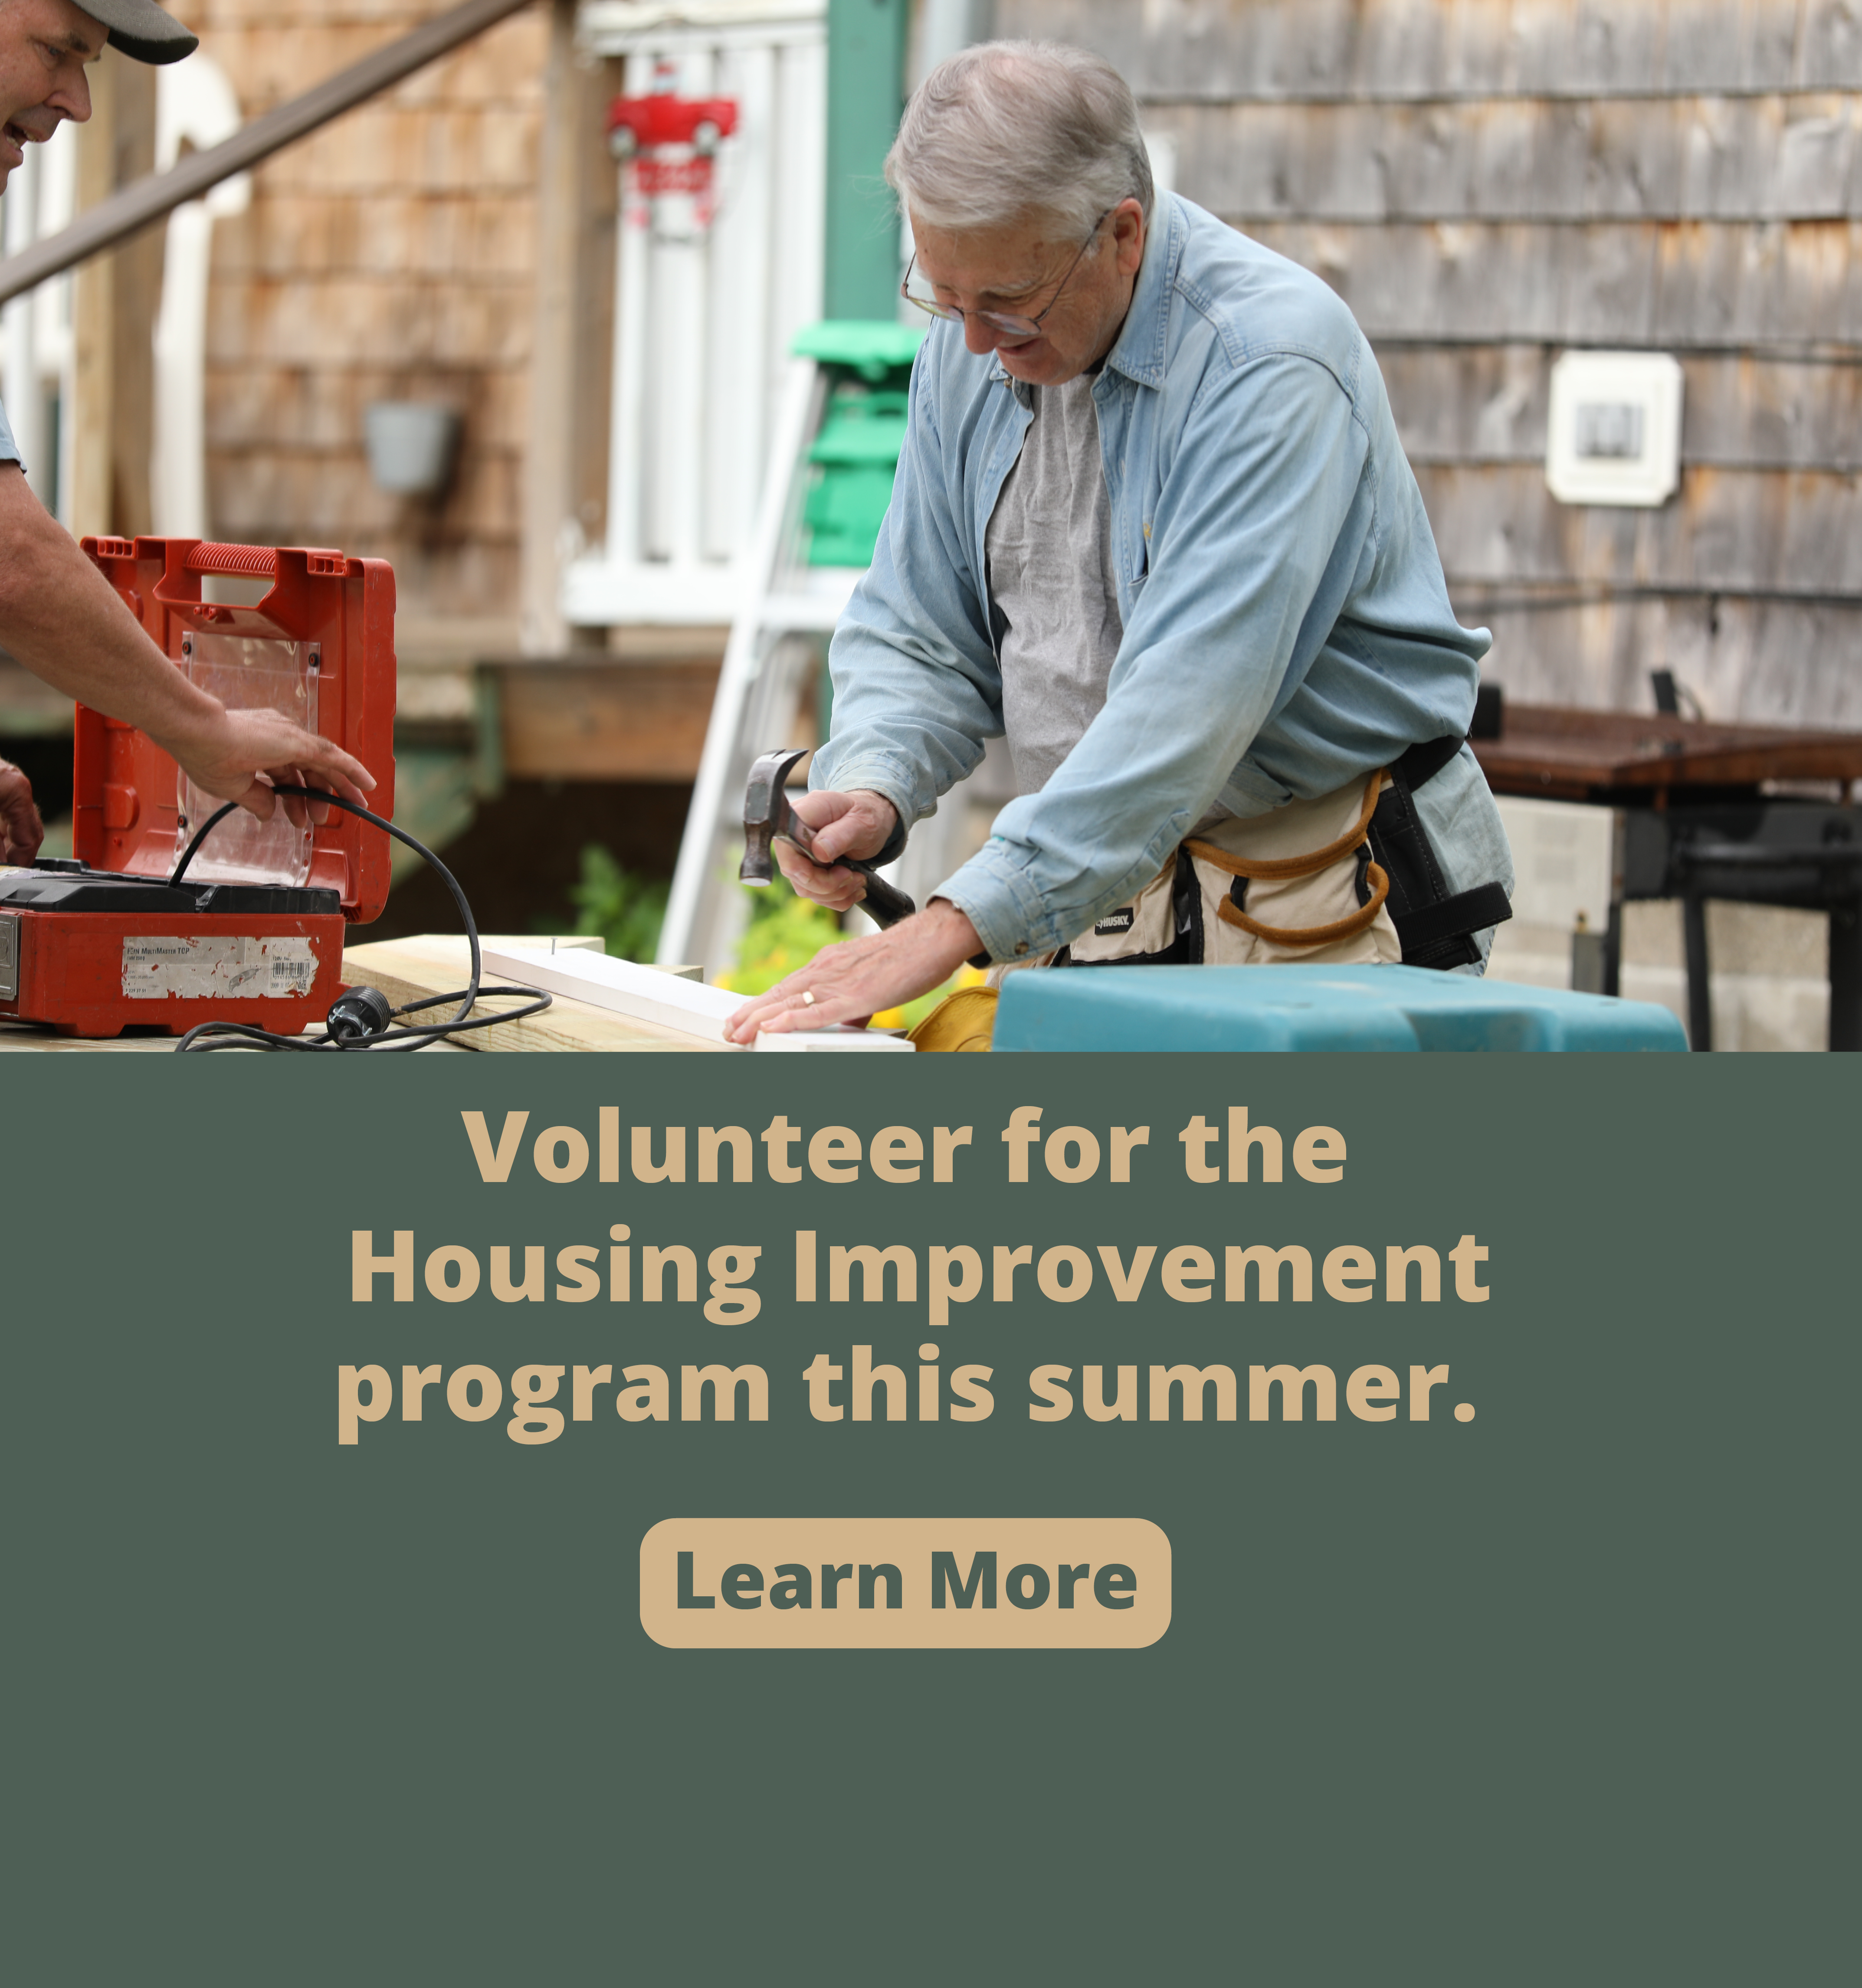 An older man hammers a piece of wood. Next to him is a banner that says "Volunteer for the Housing Improvement Program this summer. Learn More" Click to learn more.